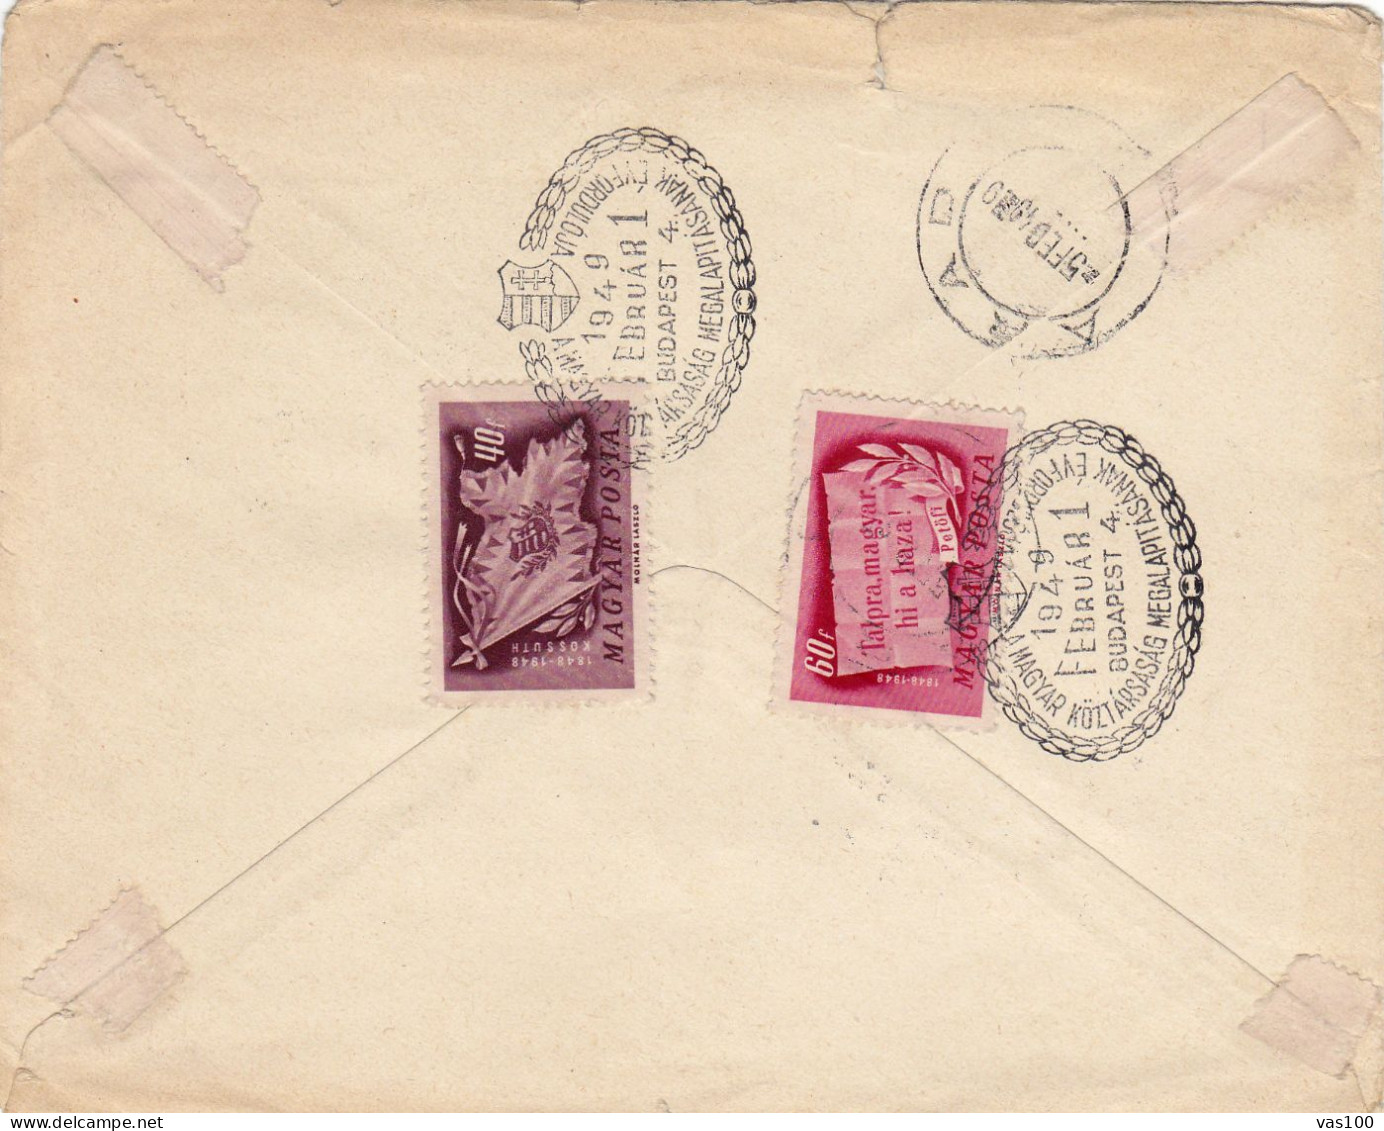 HISTORICAL DOCUMENTS  REGISTERED   COVERS  NICE FRANKING  1949  HUNGARY - Lettres & Documents